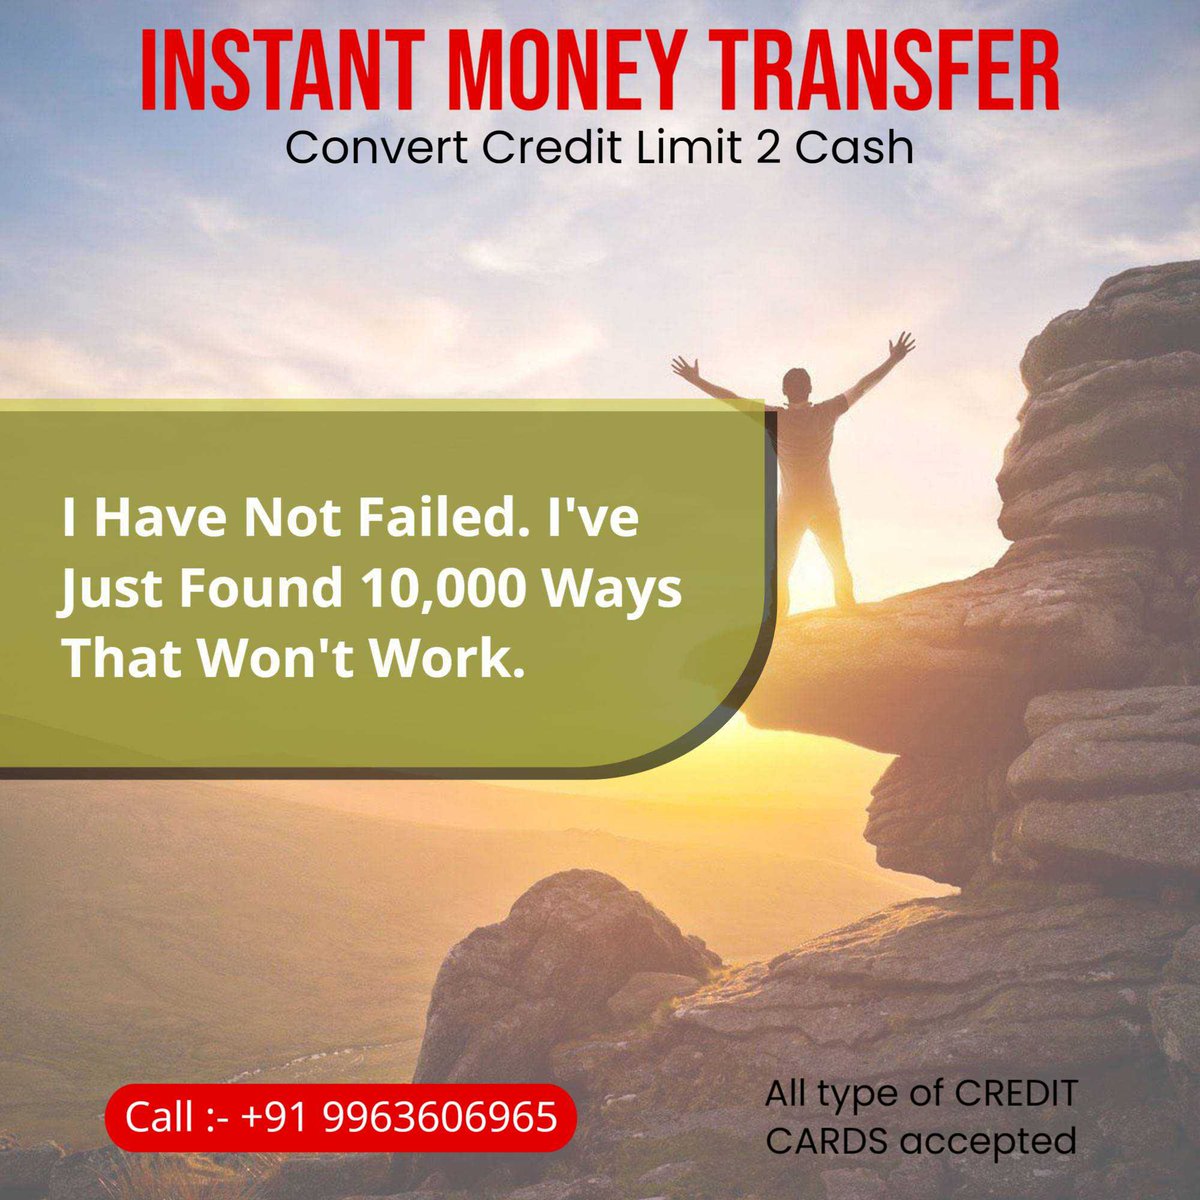 Greetings from convert credit limit 2 cash
                    #motivationalthoughts #lifemotivationalwords #motivationalvideos #amotivational #motivationallife #motivationalbottle #motivationalchallenges #emotivationalmondays #motivationaldiary #motivationalbook